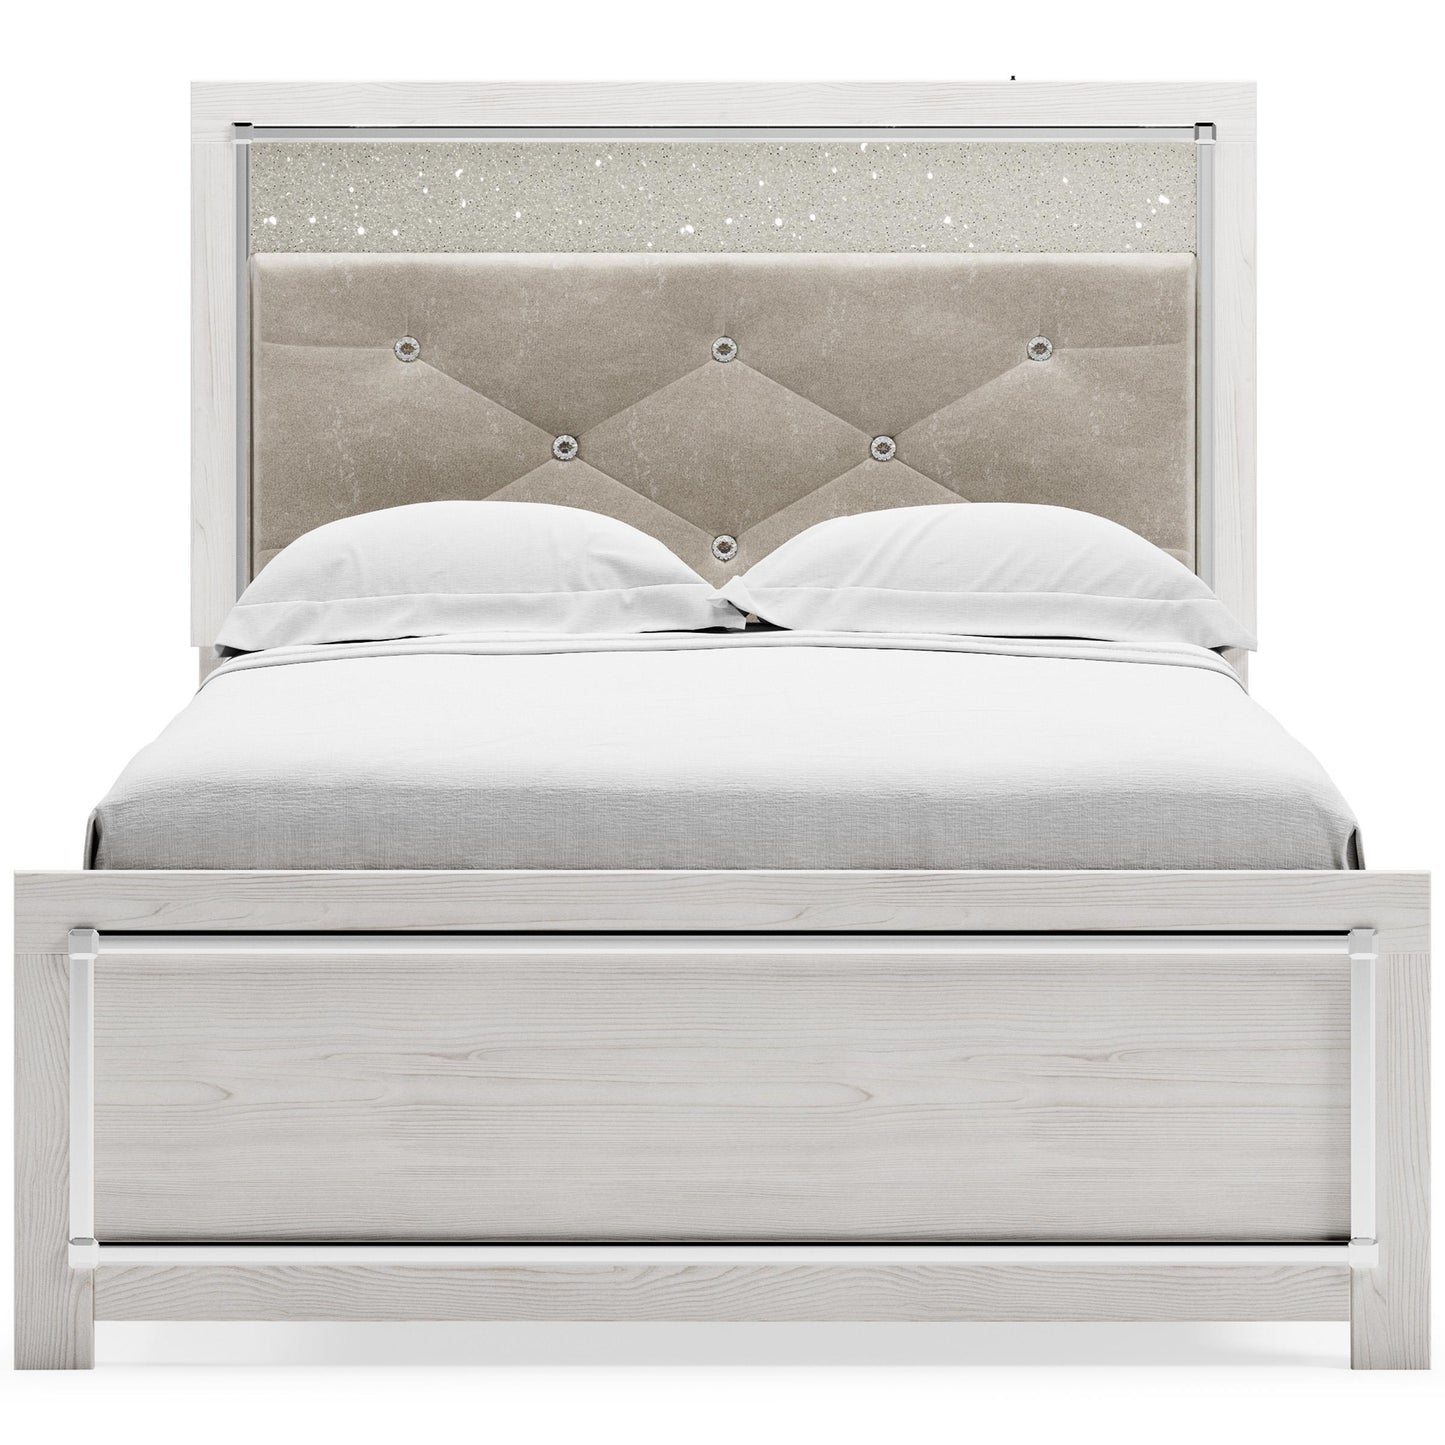 Signature Design by Ashley Kids Beds Bed B2640-87/B2640-84/B2640-86 IMAGE 2